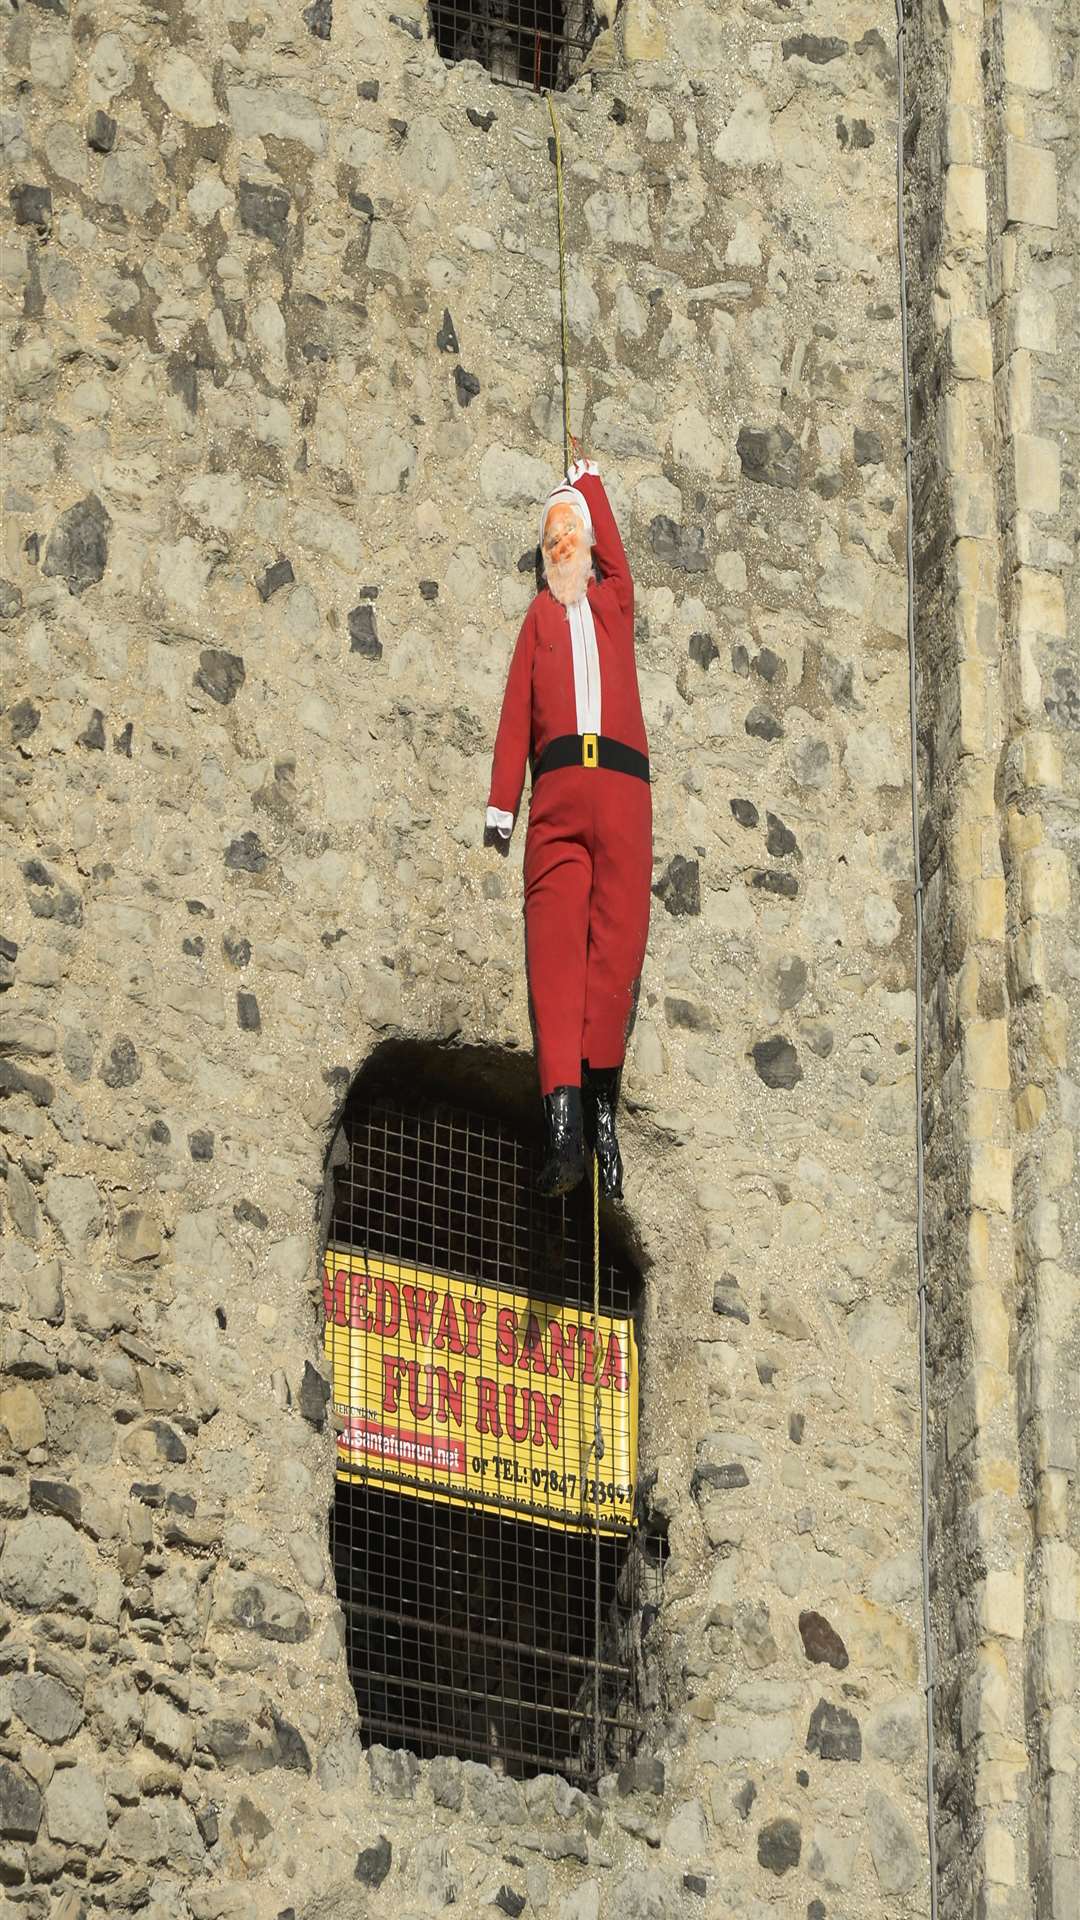 Santa Claus is suspended 70 feet in the air from Rochester Castle